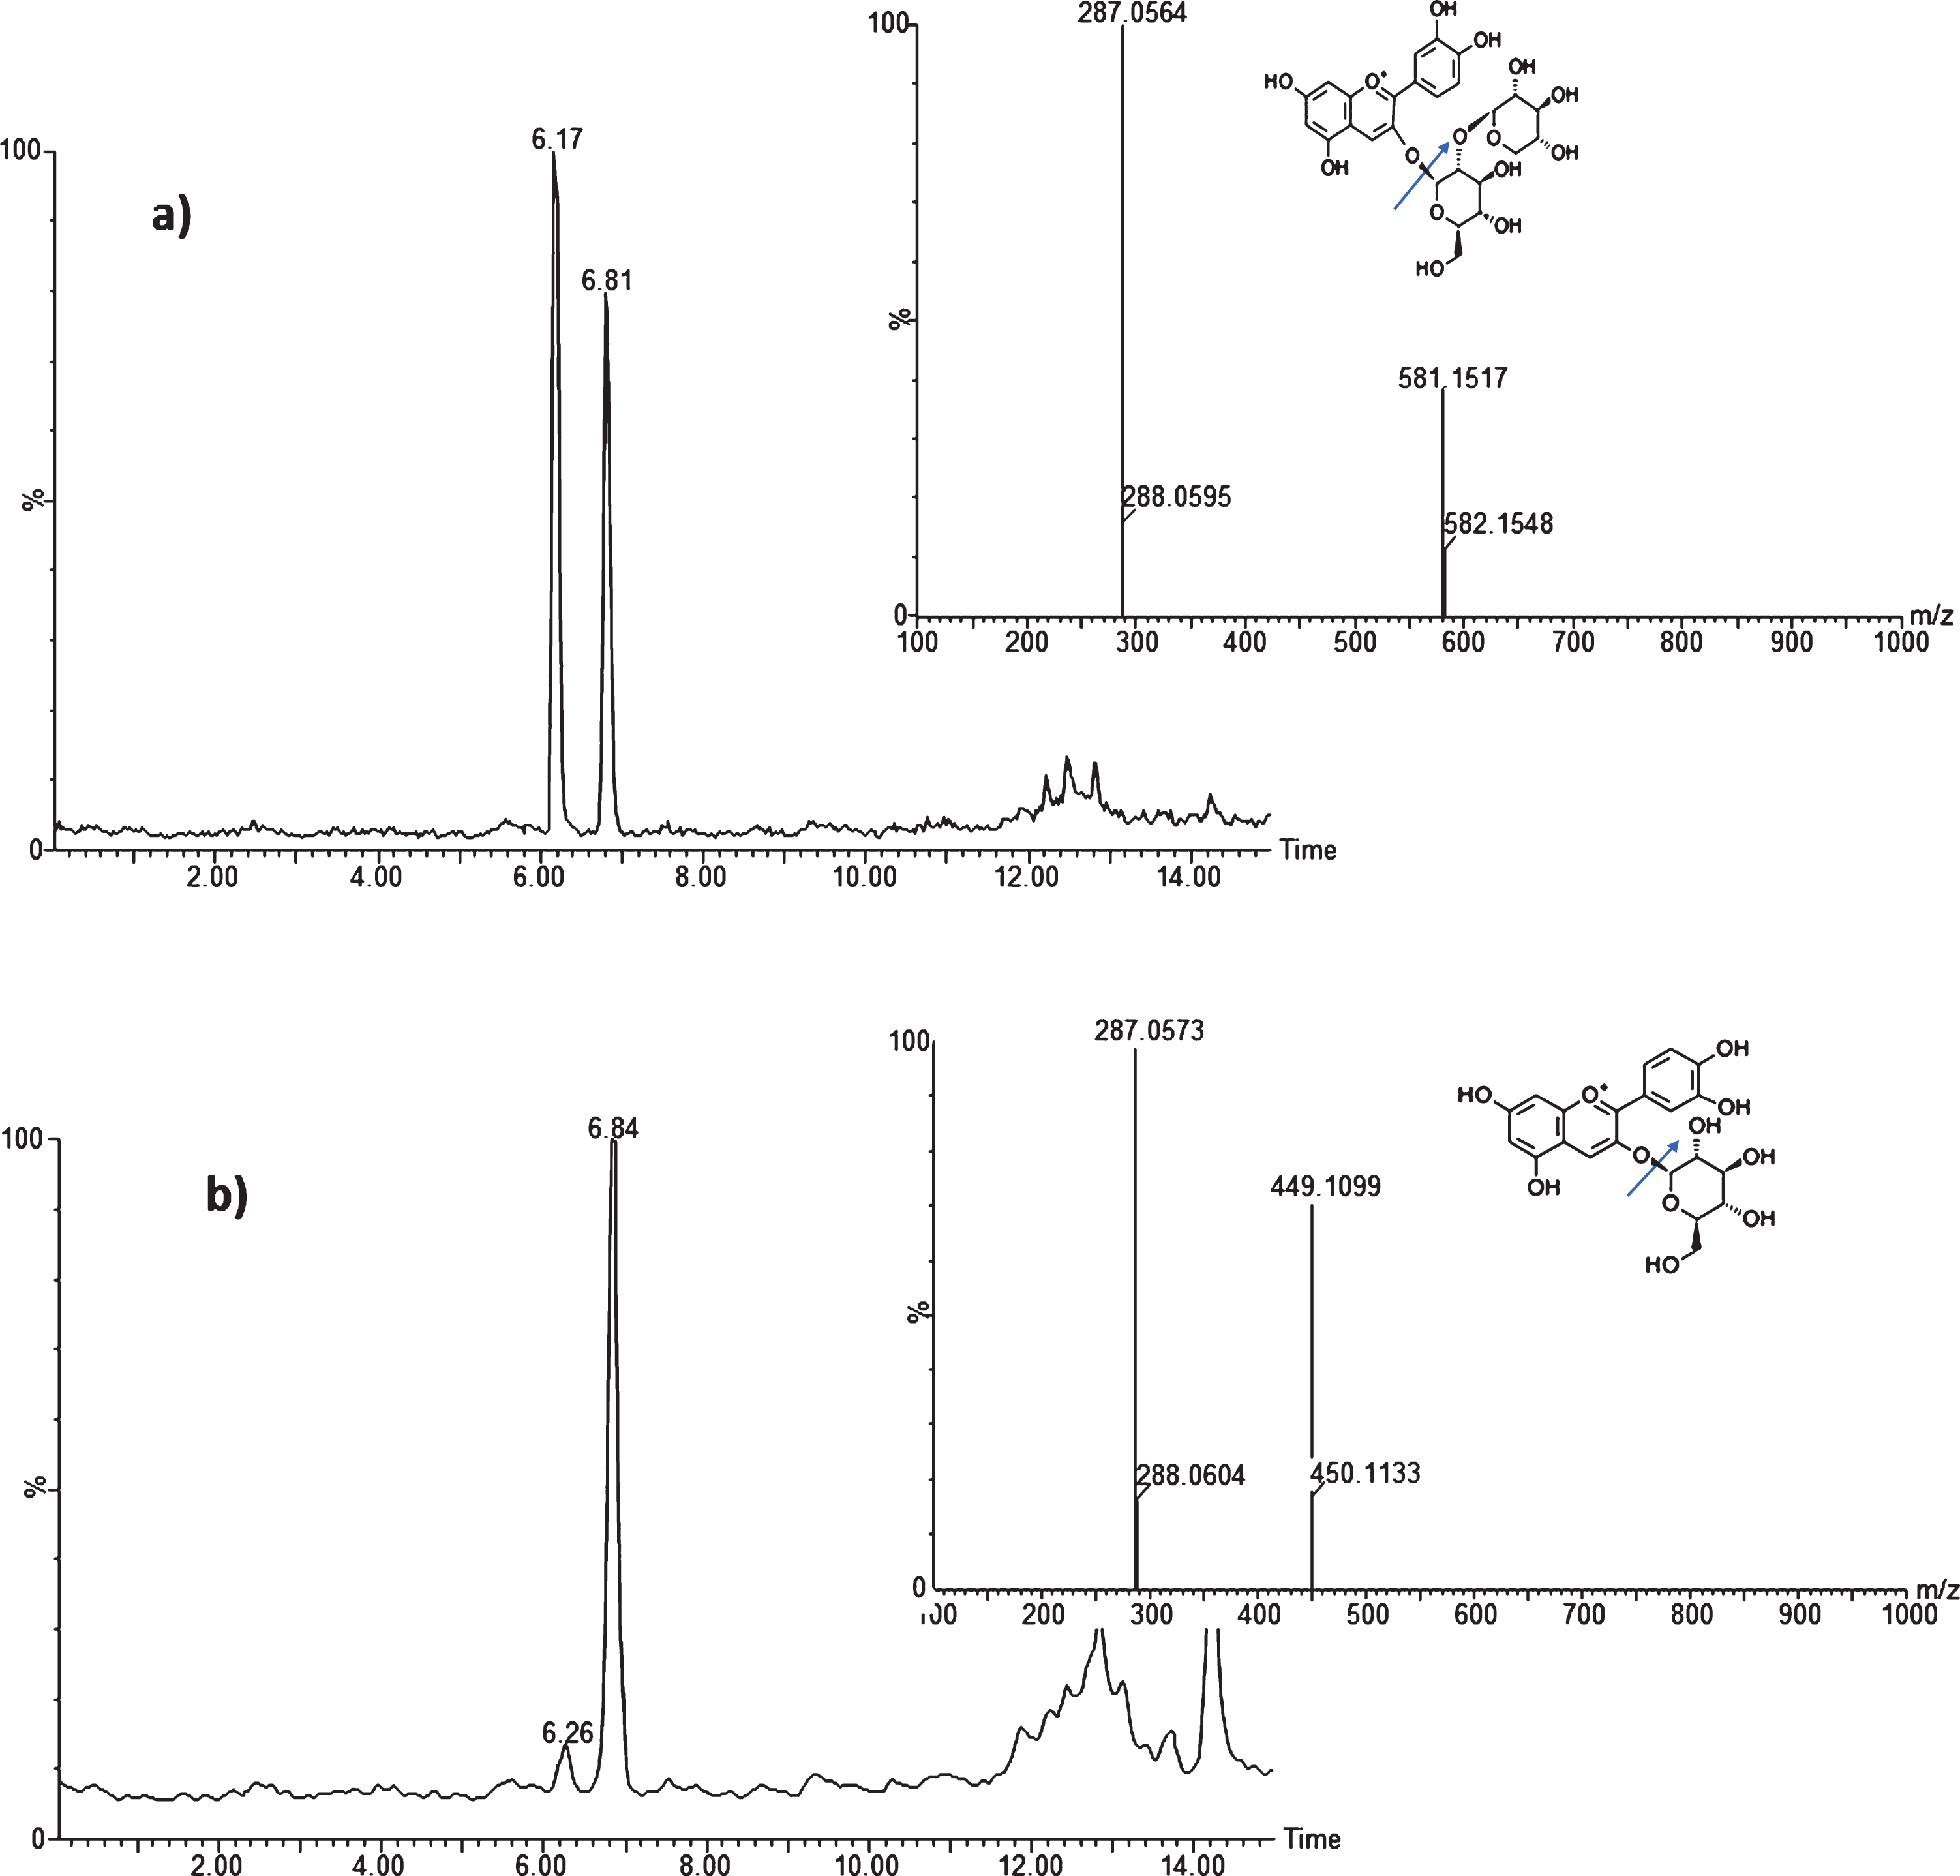 Representative full mass spectrum of anthocyanins: a) peaks 1 and 3 (6.17 and 6.81 min, respectively): cyanidin derivatives type cyanidin 3-O-sambubioside and b) peak 4 (6.84 min): cyanidin 3-O-glucoside and peak 3 (6.26 min): cyanidin derivative type cyanidin 3-O-glucoside.